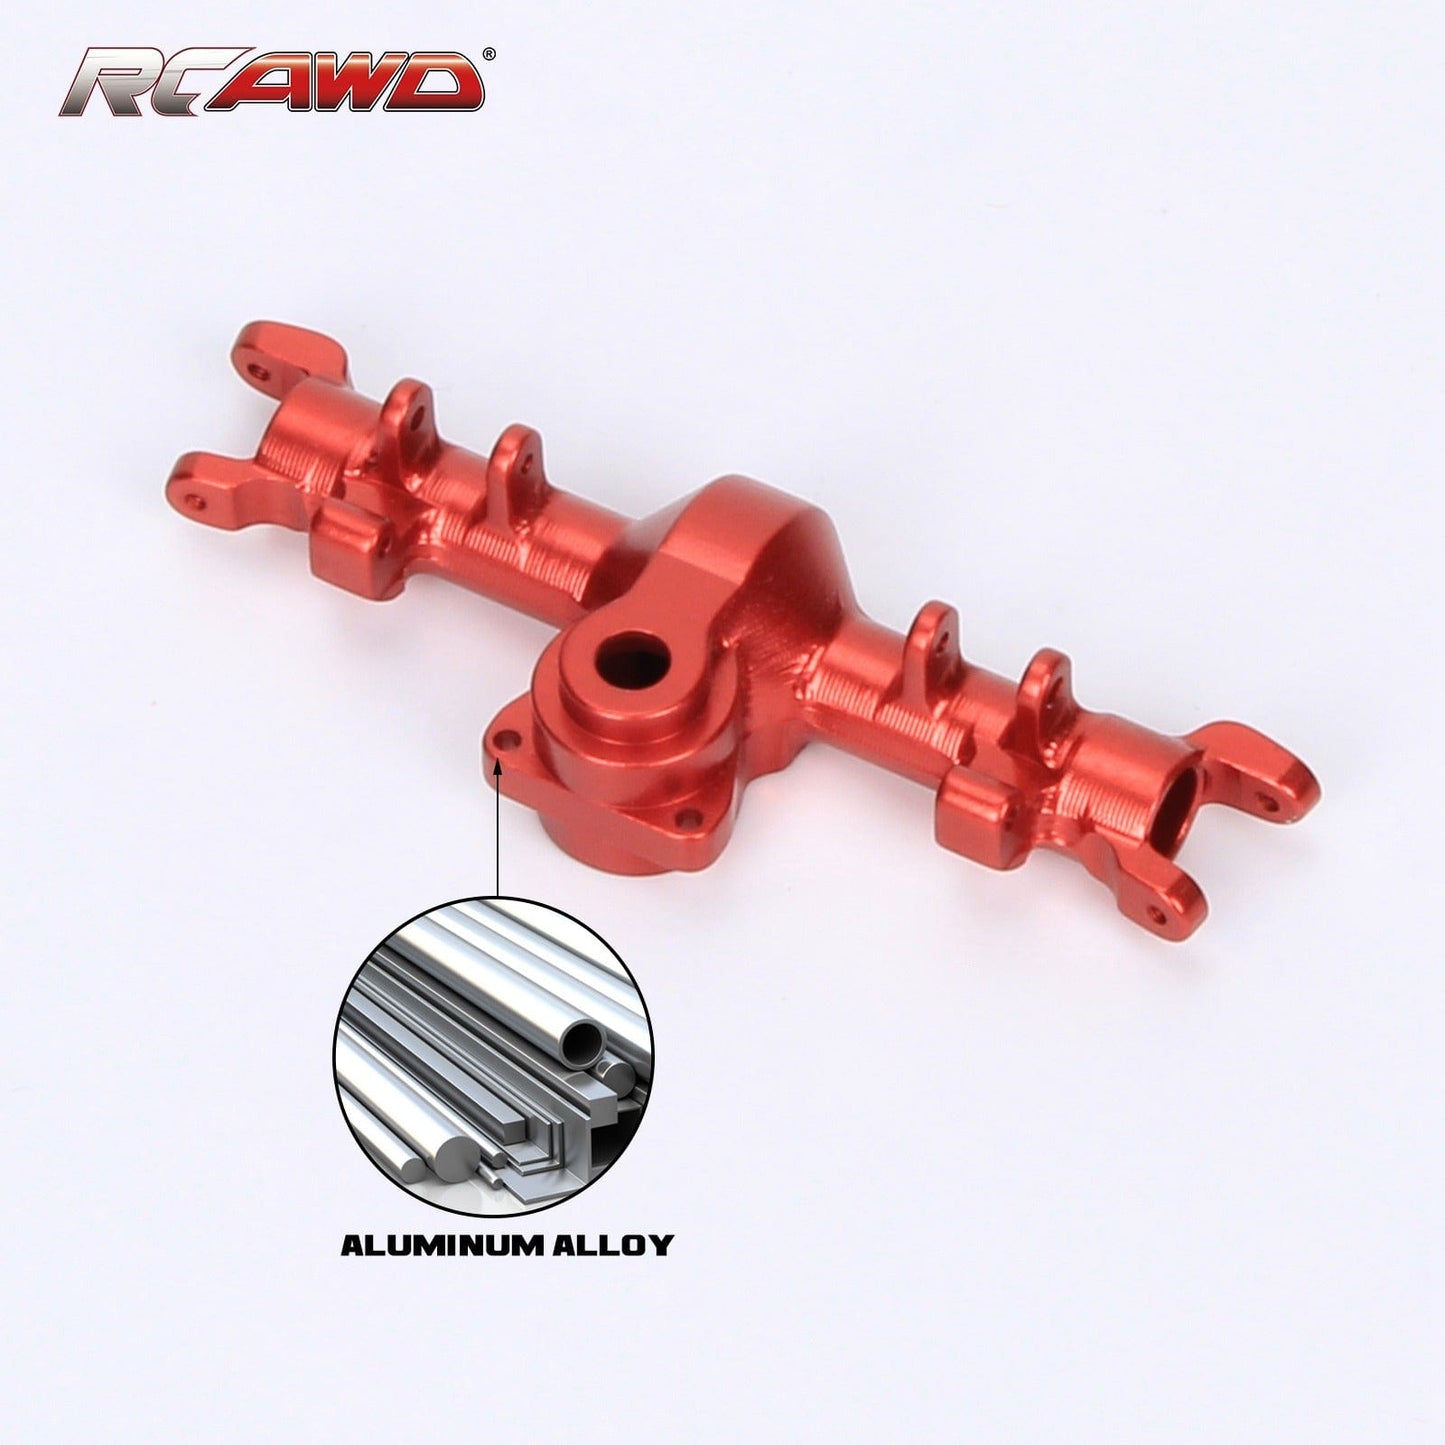 RCAWD RCAWD 1/24 Axial SCX24 Upgrades Aluminum alloy front axle housing w/o gears SCX2455